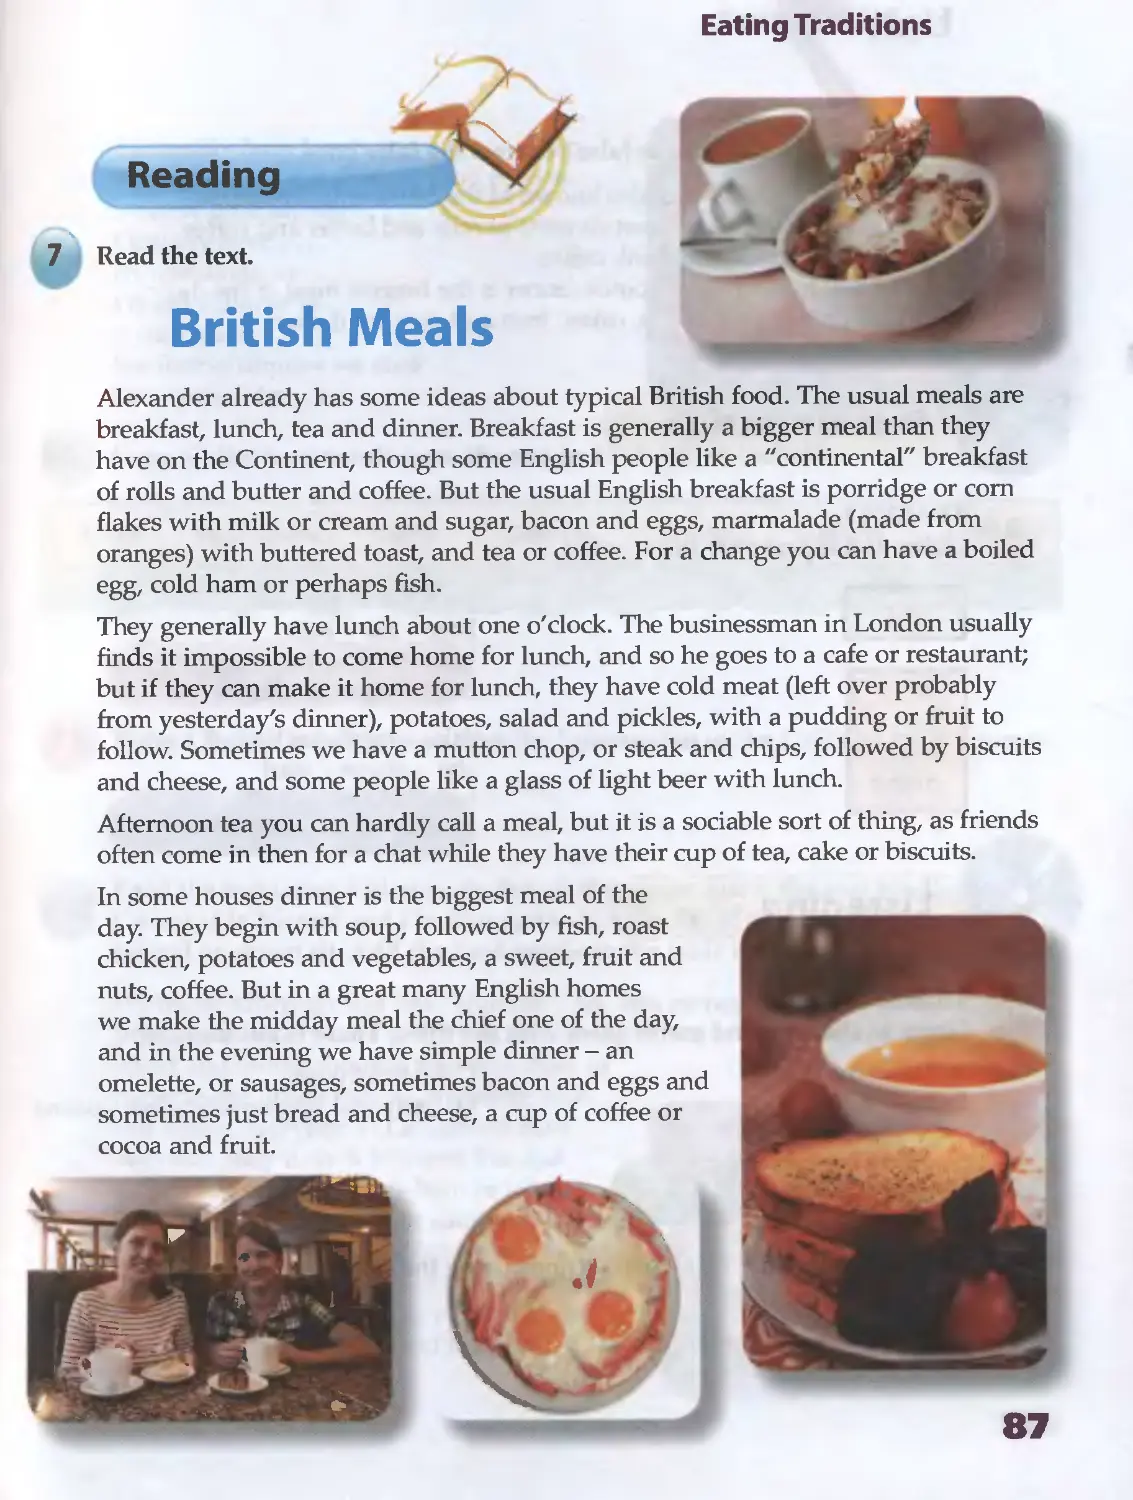 Переведи завтрак на английский. British meals текст. What is a Continental Breakfast. Revise the texts in p 87 and 96 and answer the questions 1 what is a Continental Breakfast ответы. British meals учебник.